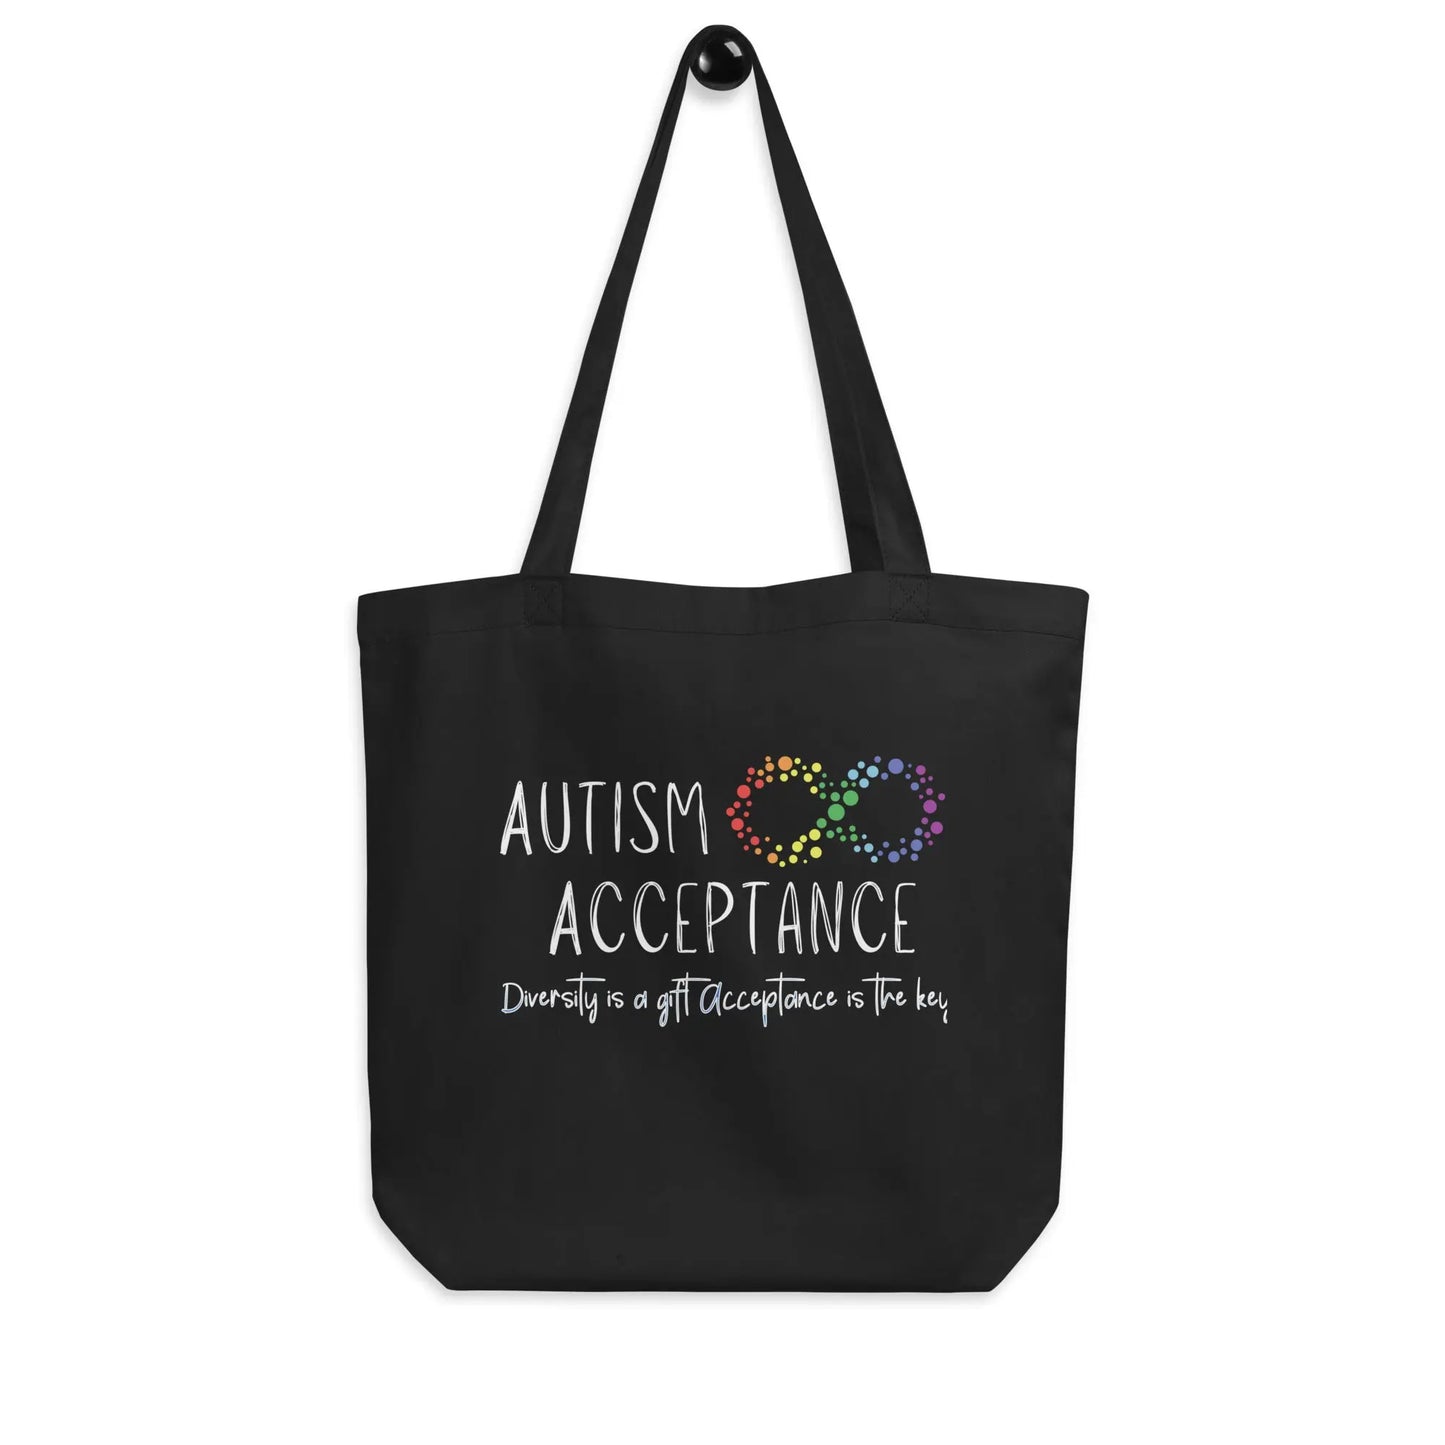 Cute Tote Bag for Autism Advocates - Spread the Message of Acceptance and Diversity Personalized Option Great Gift for Supporters of Autism Affordable ABA Materials